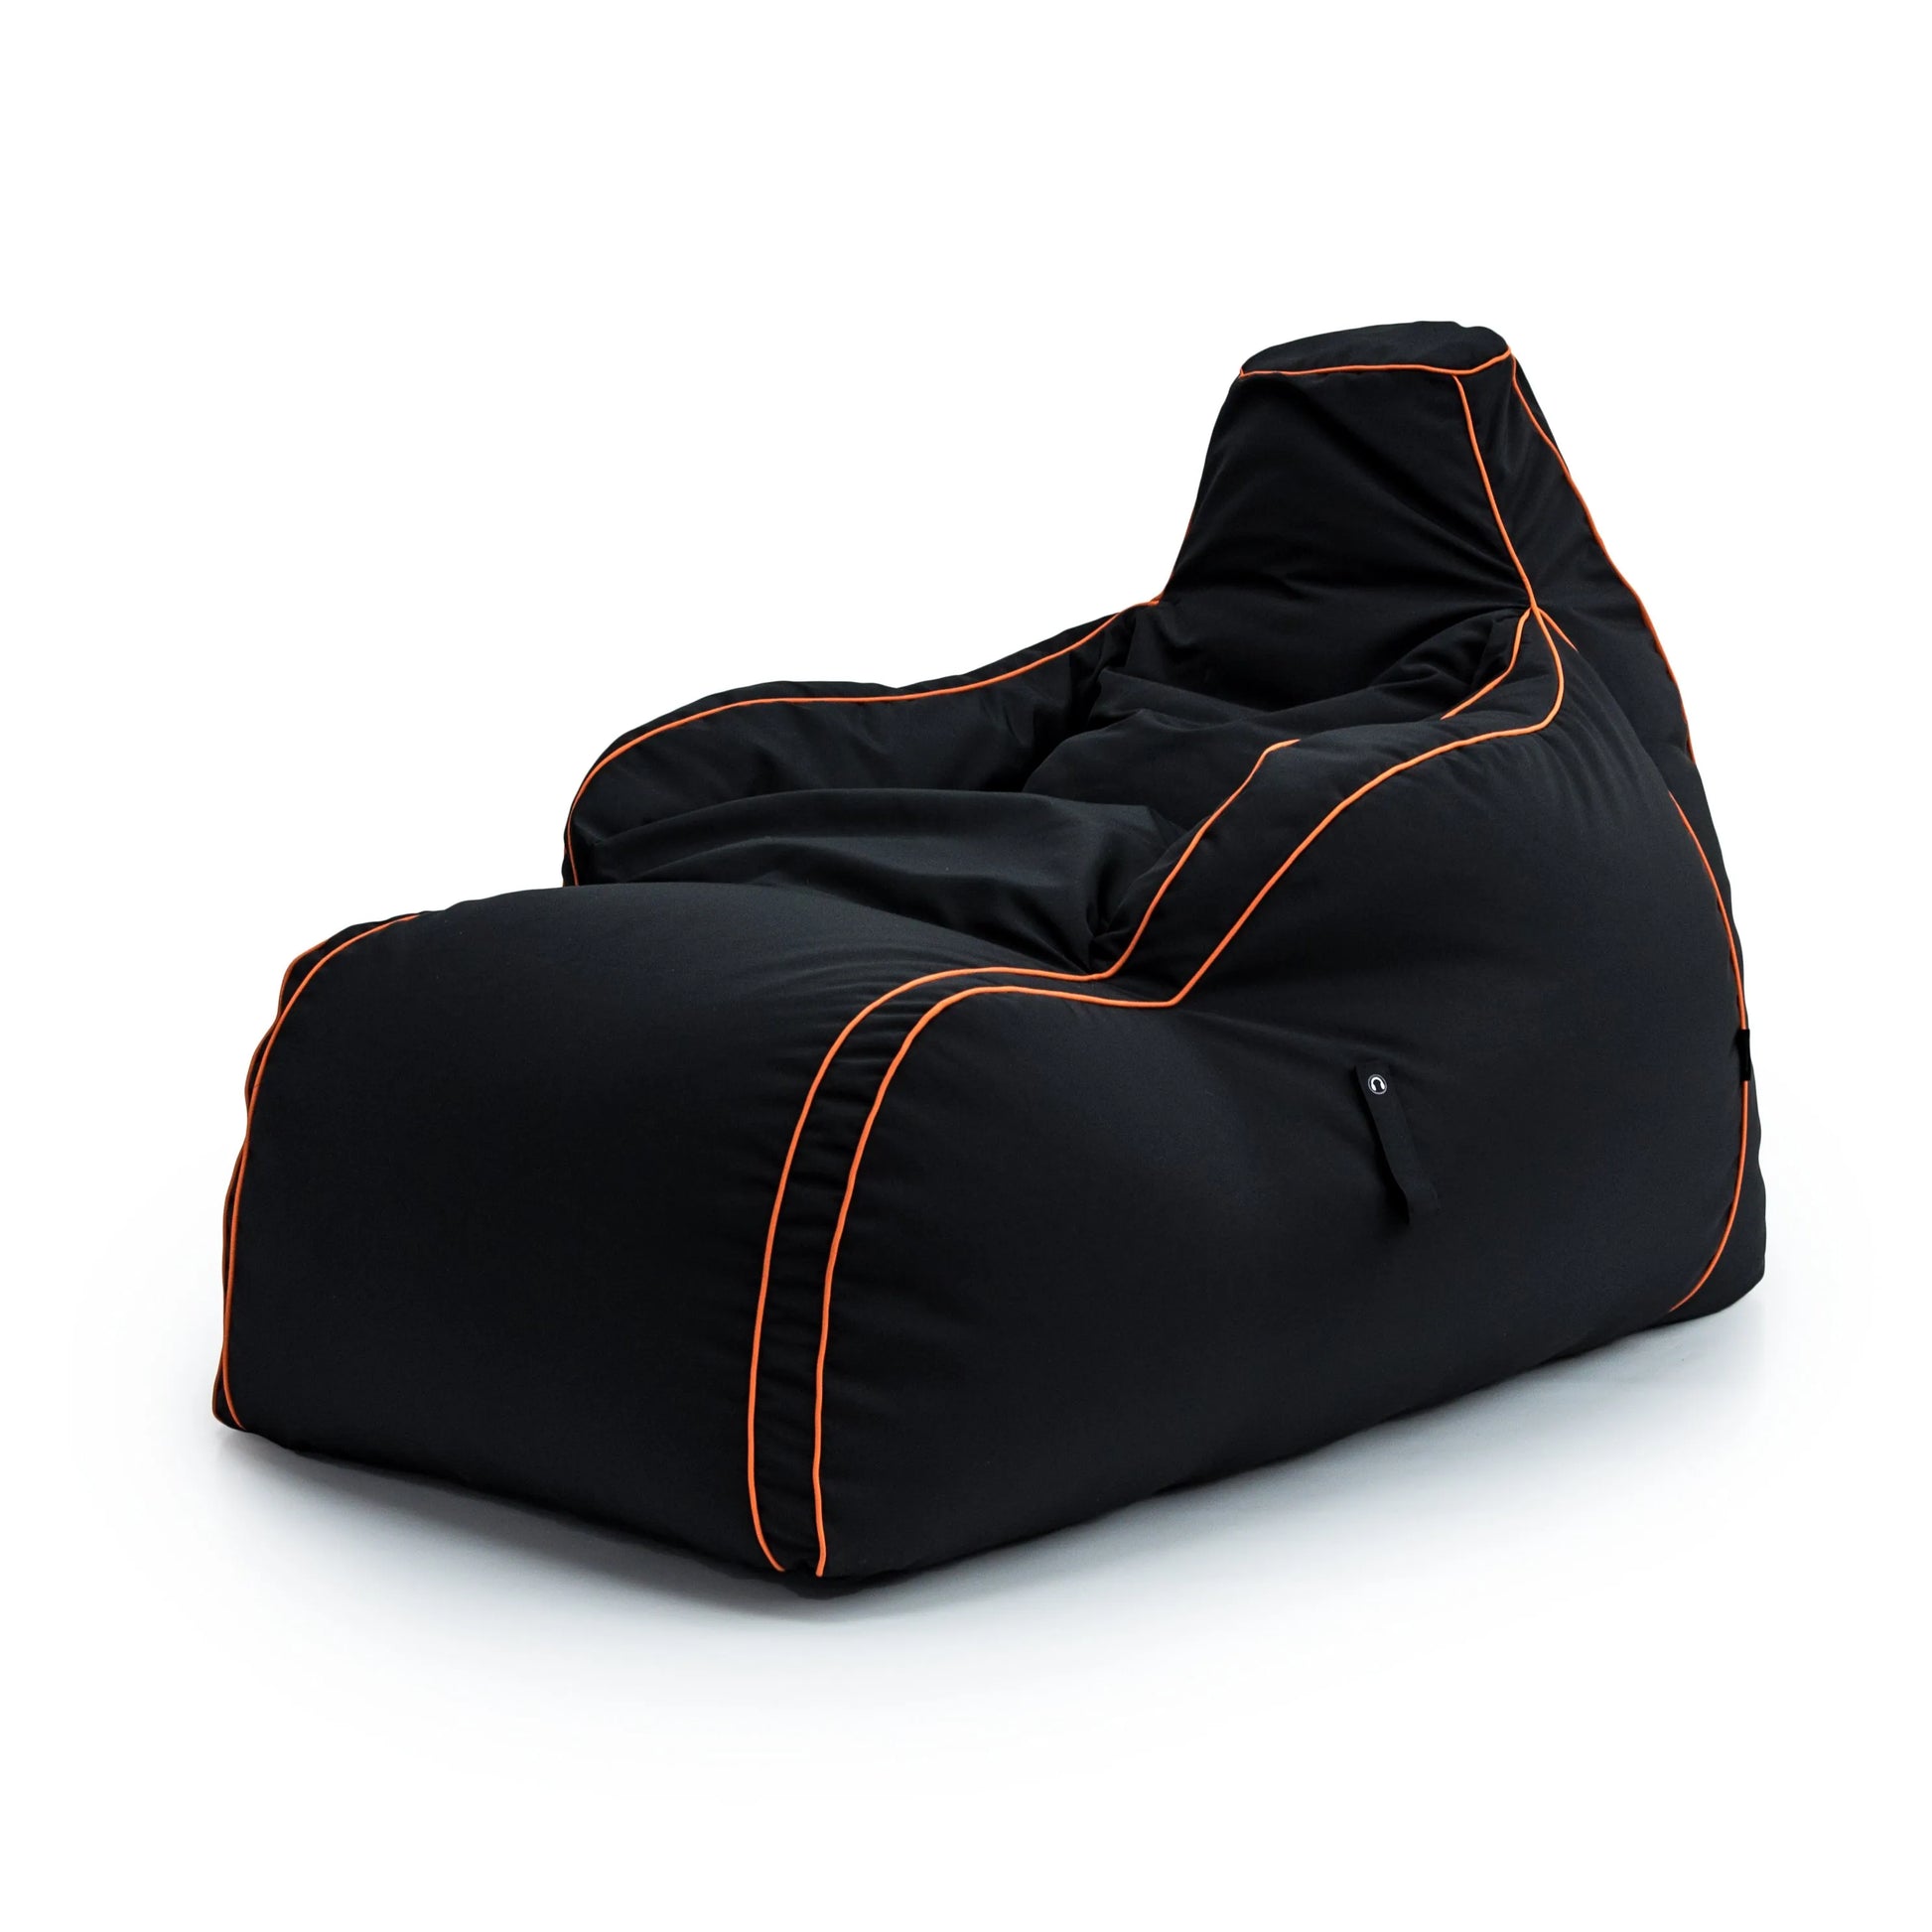 A black bean bag cover with orange trim and a headphone holder sits on a white background.